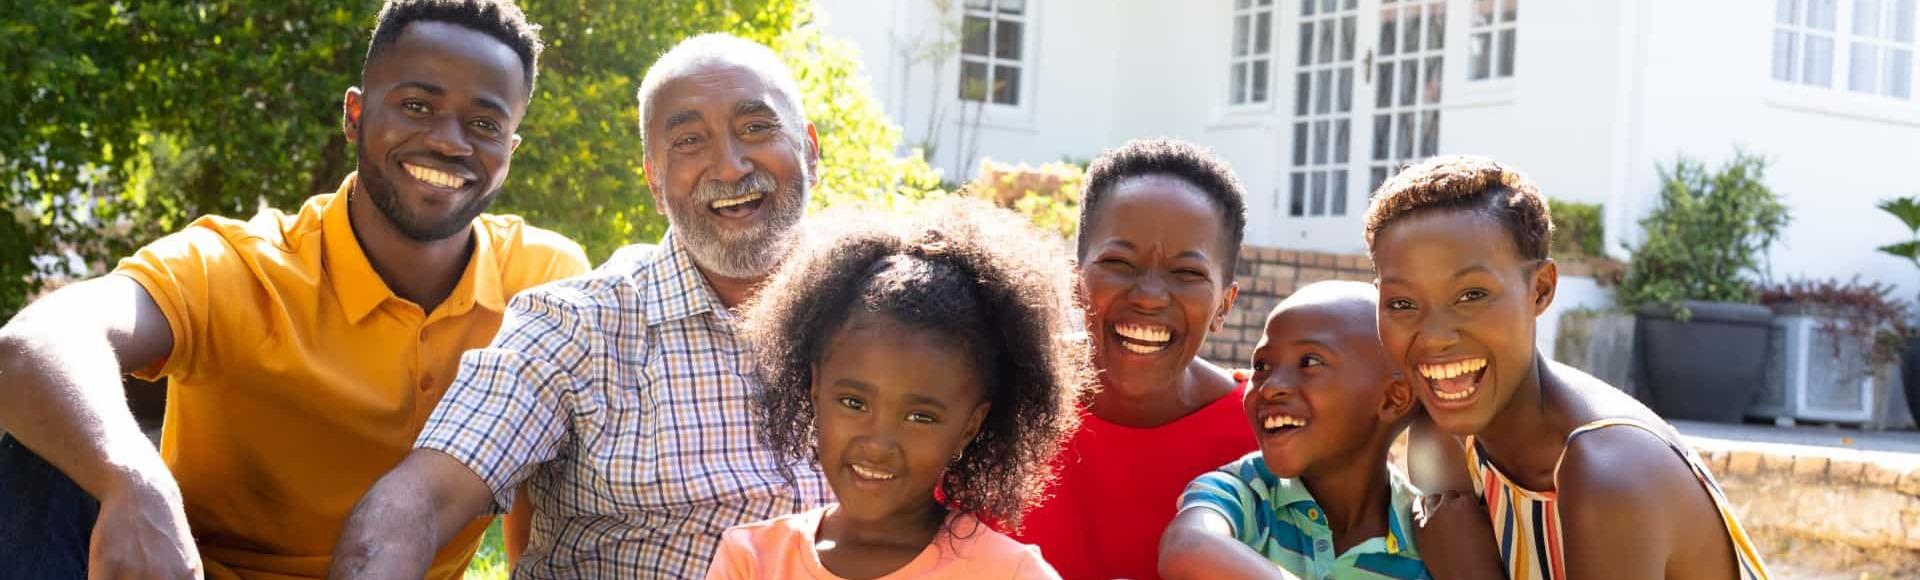 Multigenerational African American family in front of house